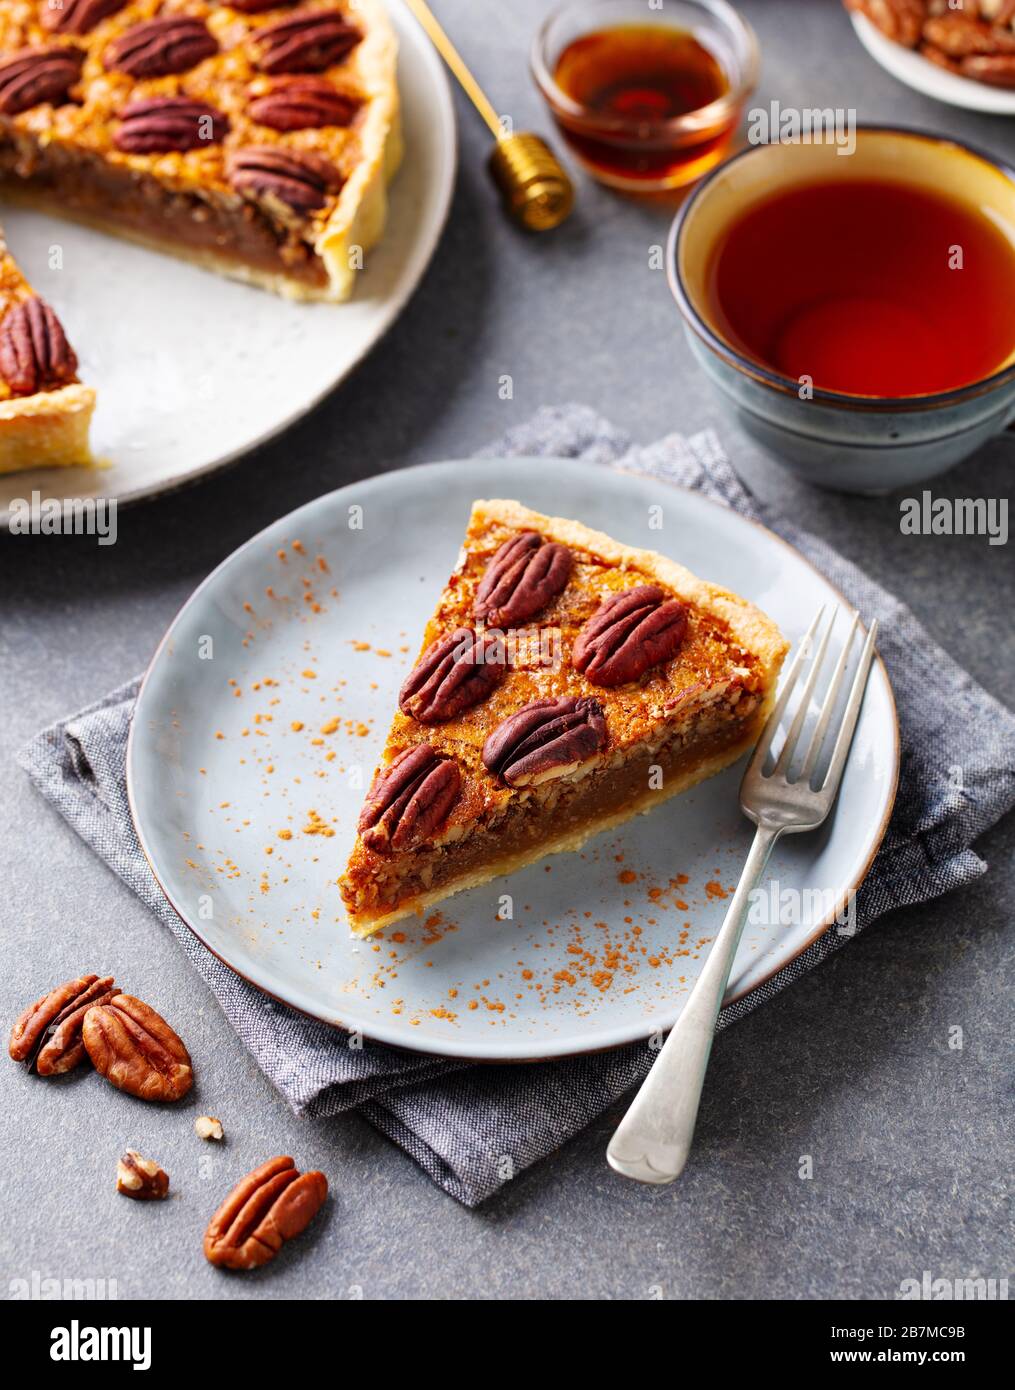 Pecan pie, tart slice on a plate with cup of tea. Grey background. Stock Photo